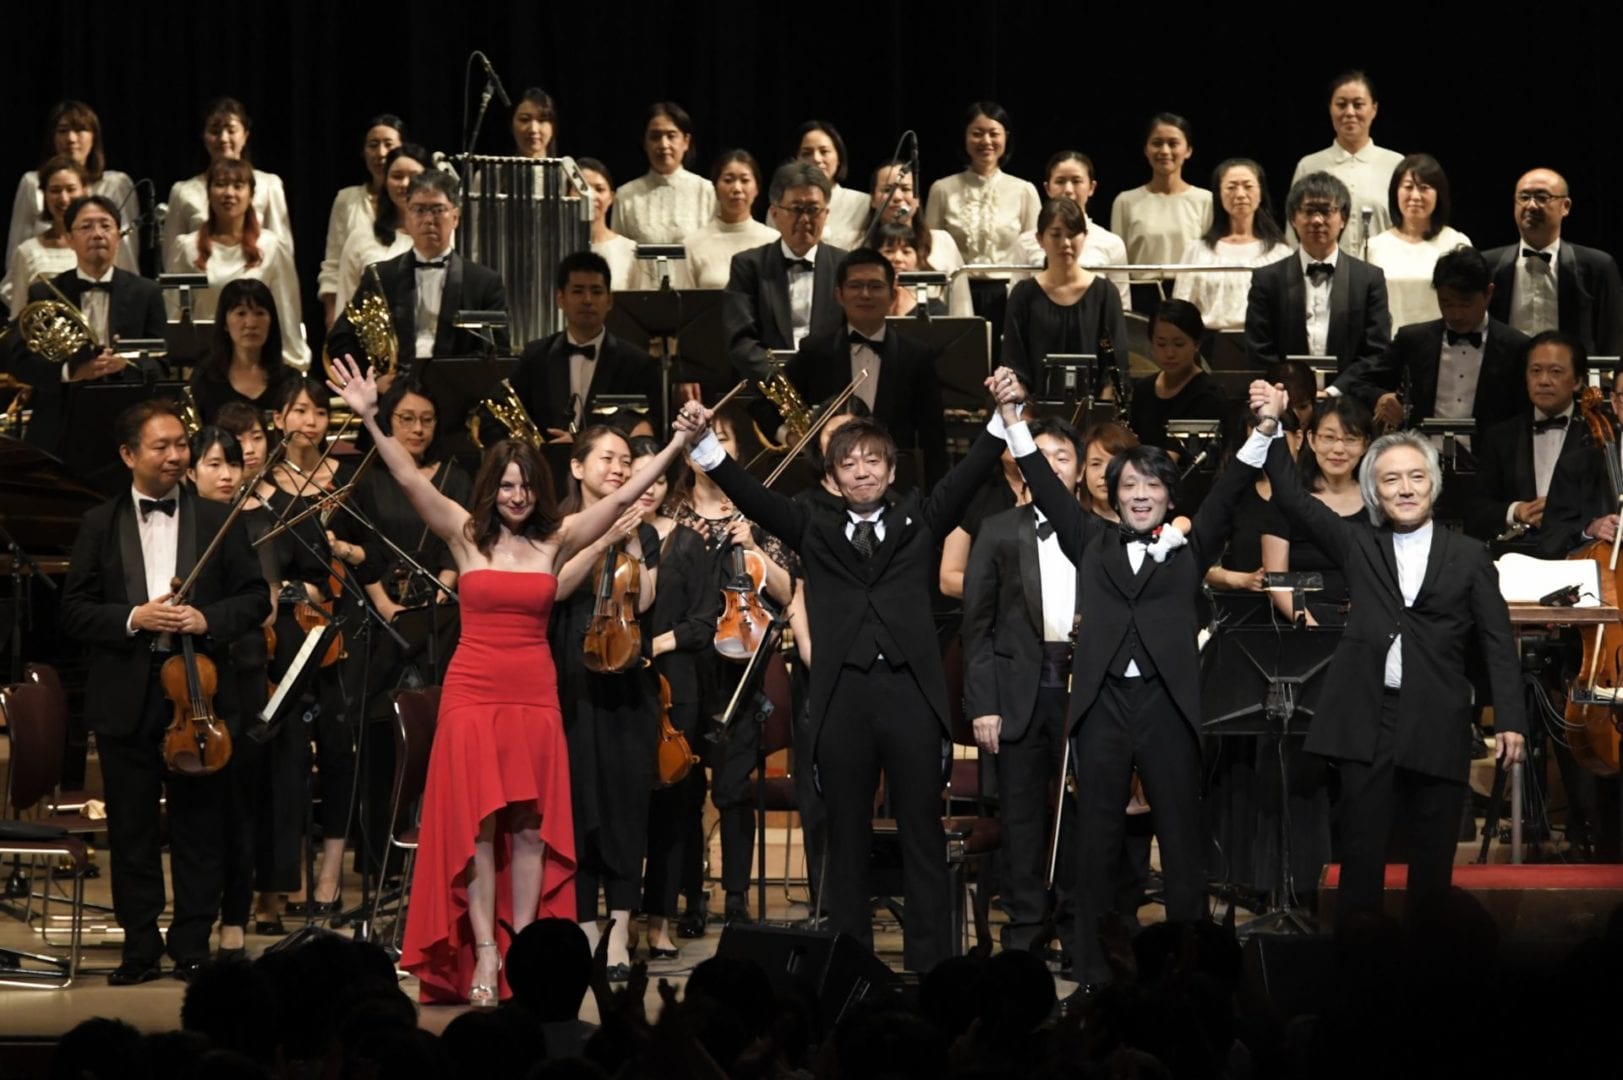 The Final Fantasy XIV Orchestra Concert in Yokohama Was an Emotional